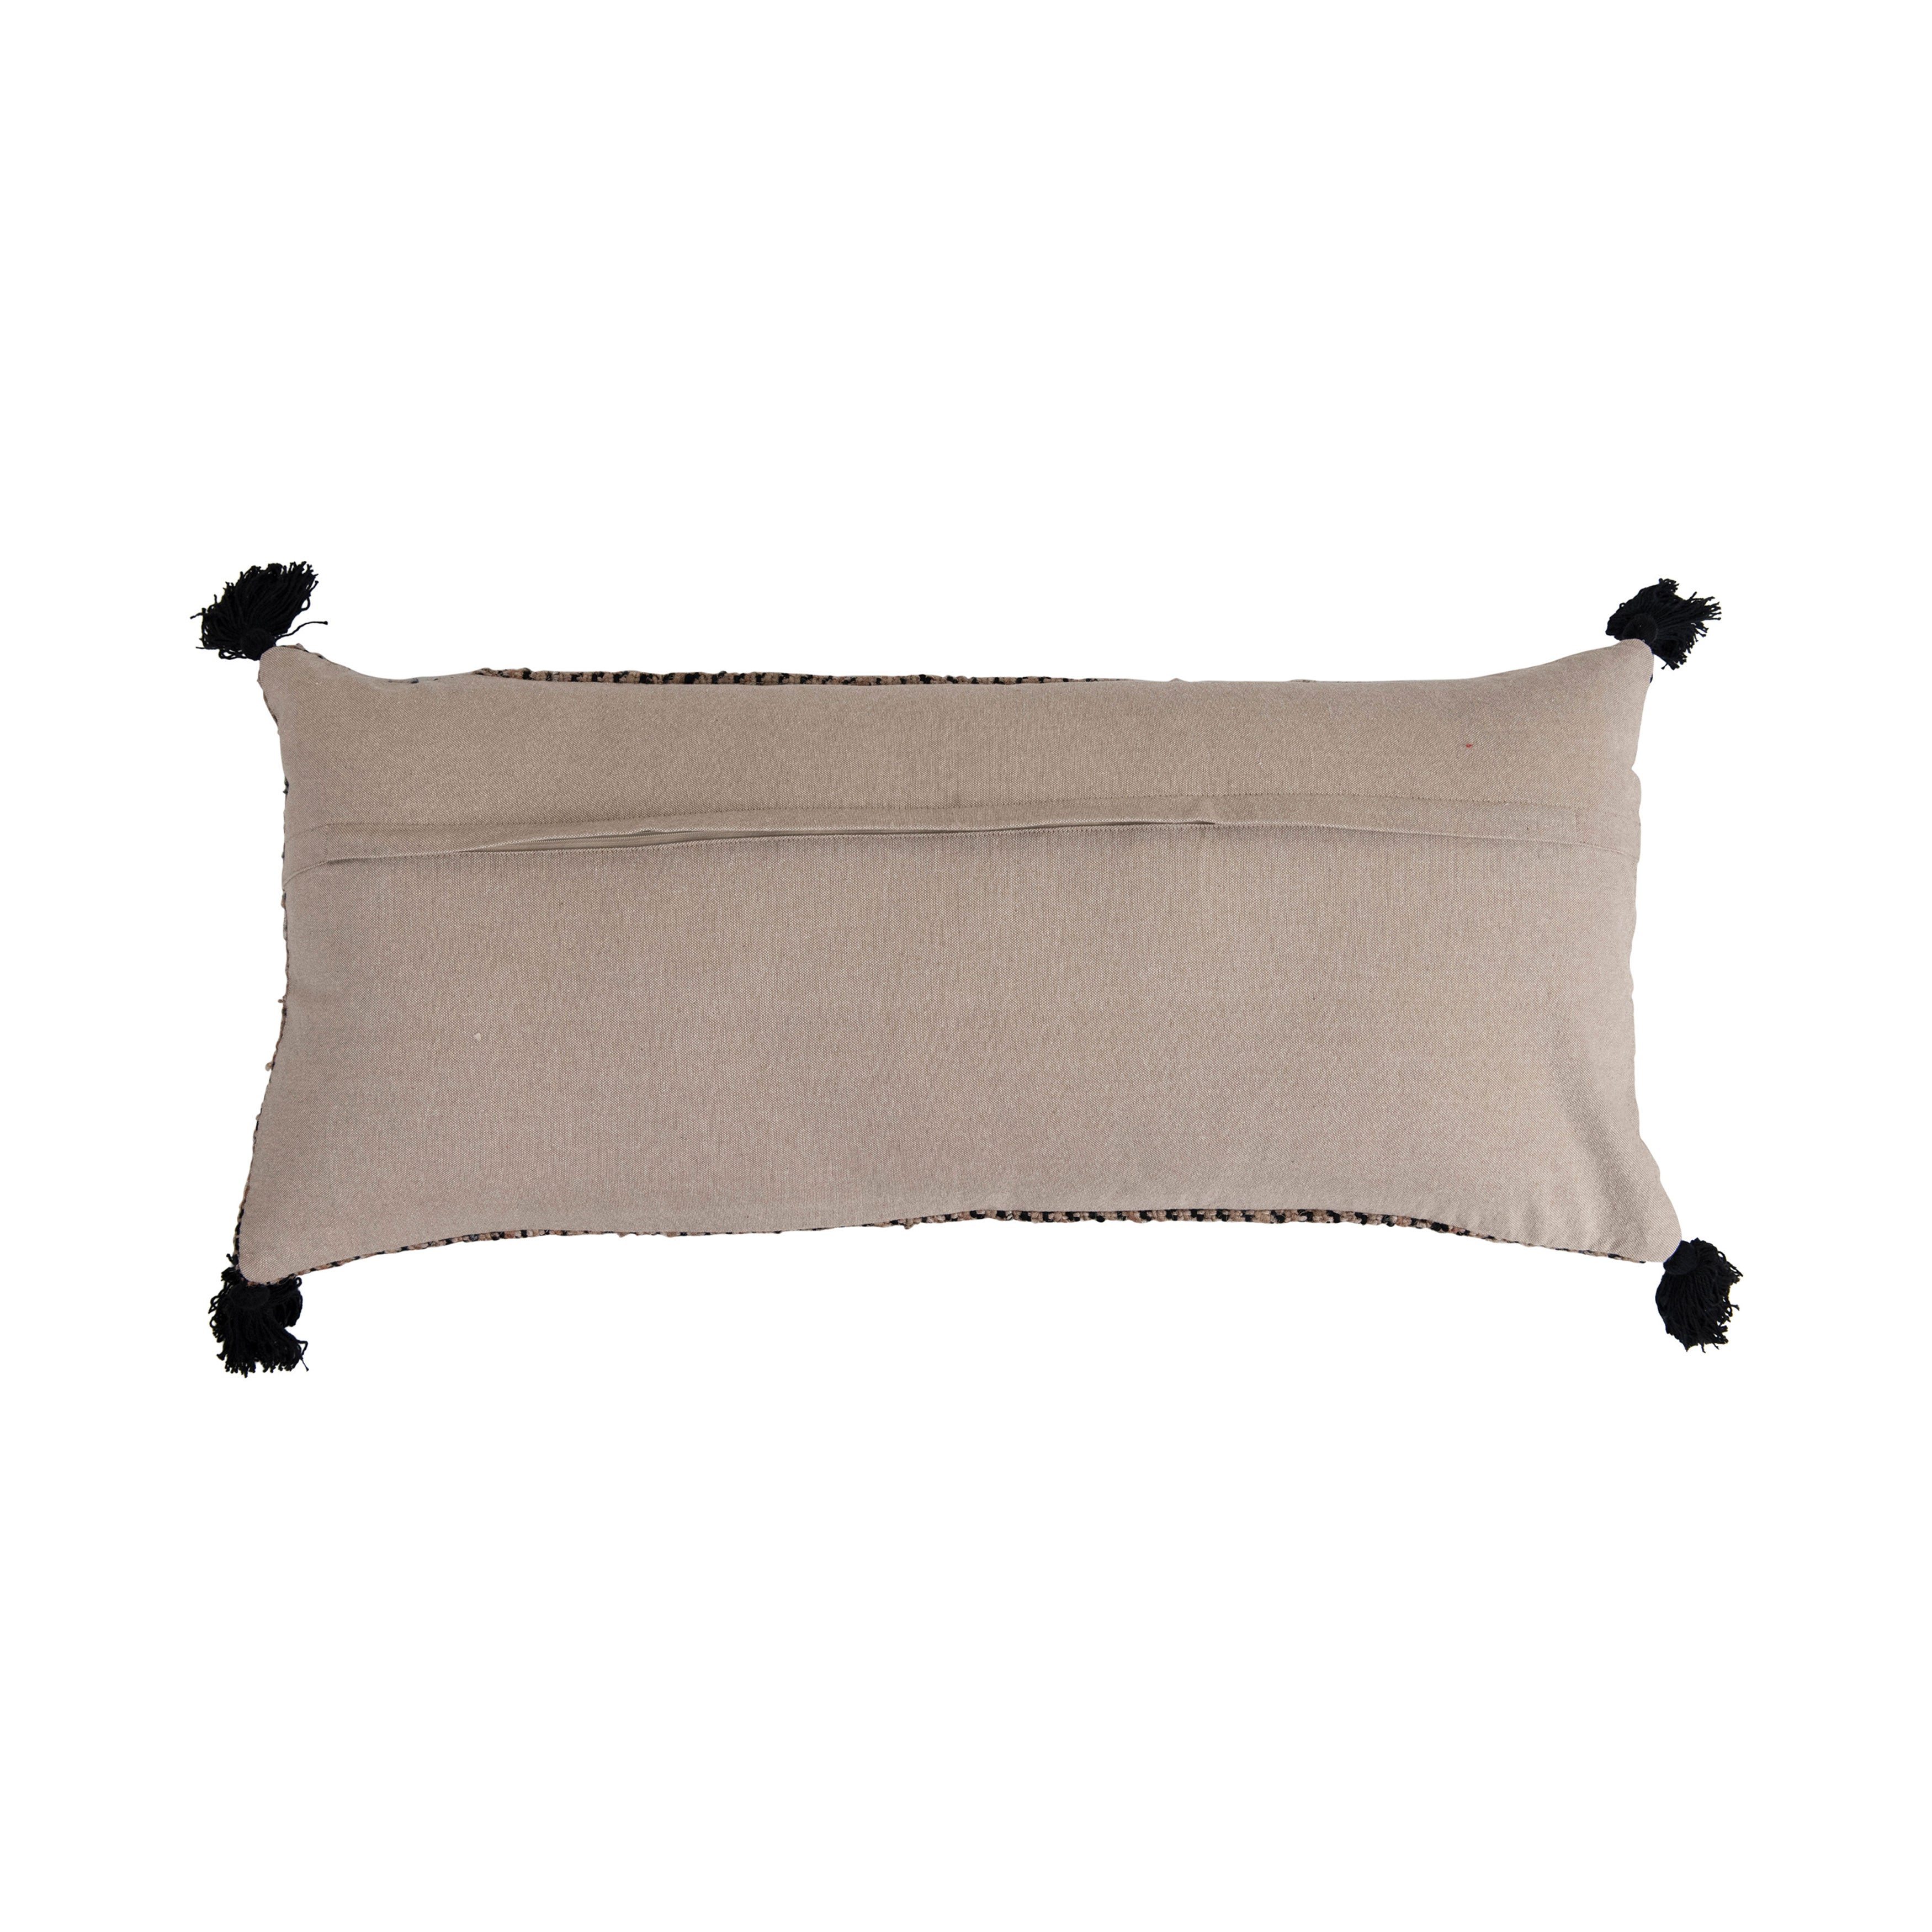 Woven Cotton Striped Lumbar Pillow with Chambray Back & Tassels